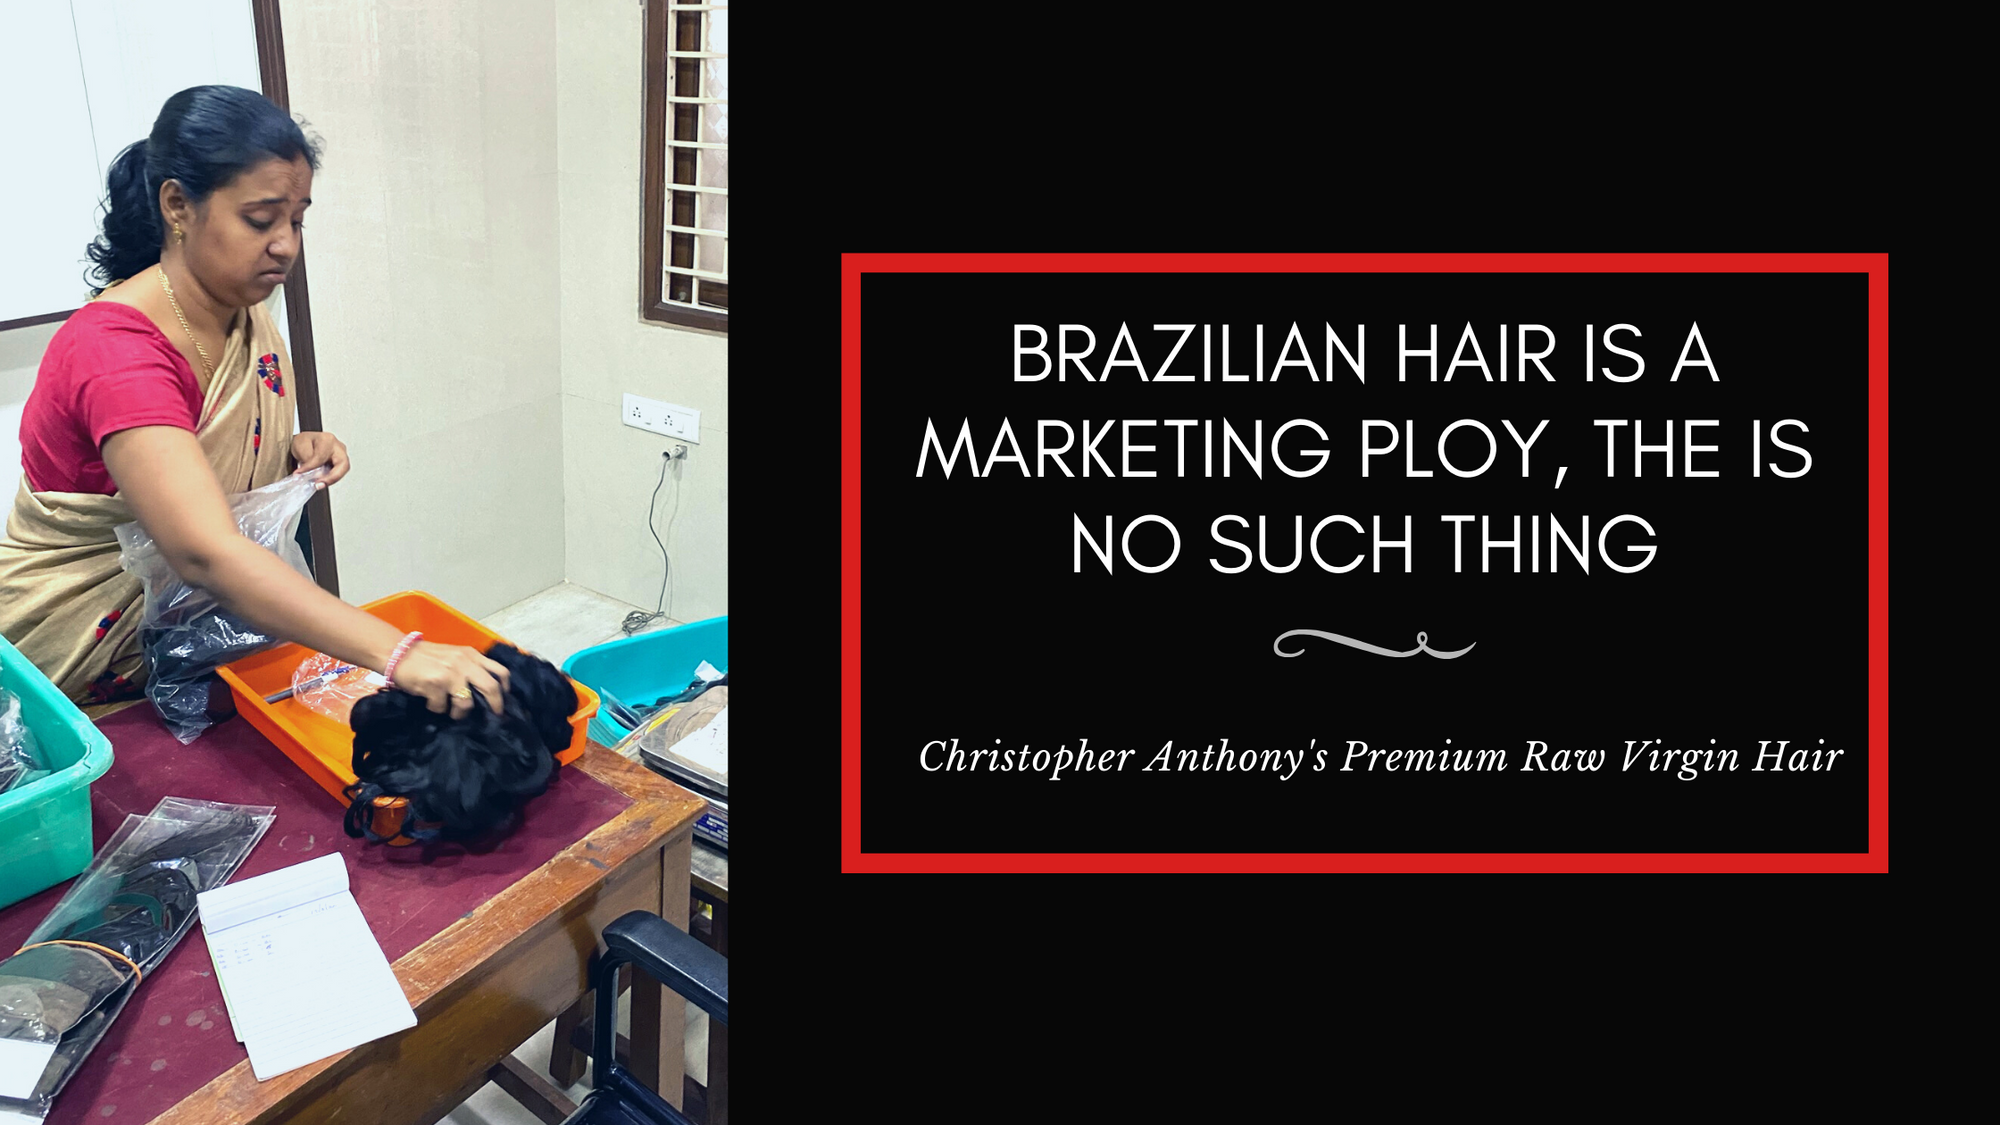 Fact: Brazilian hair is a marketing ploy, there is no such thing